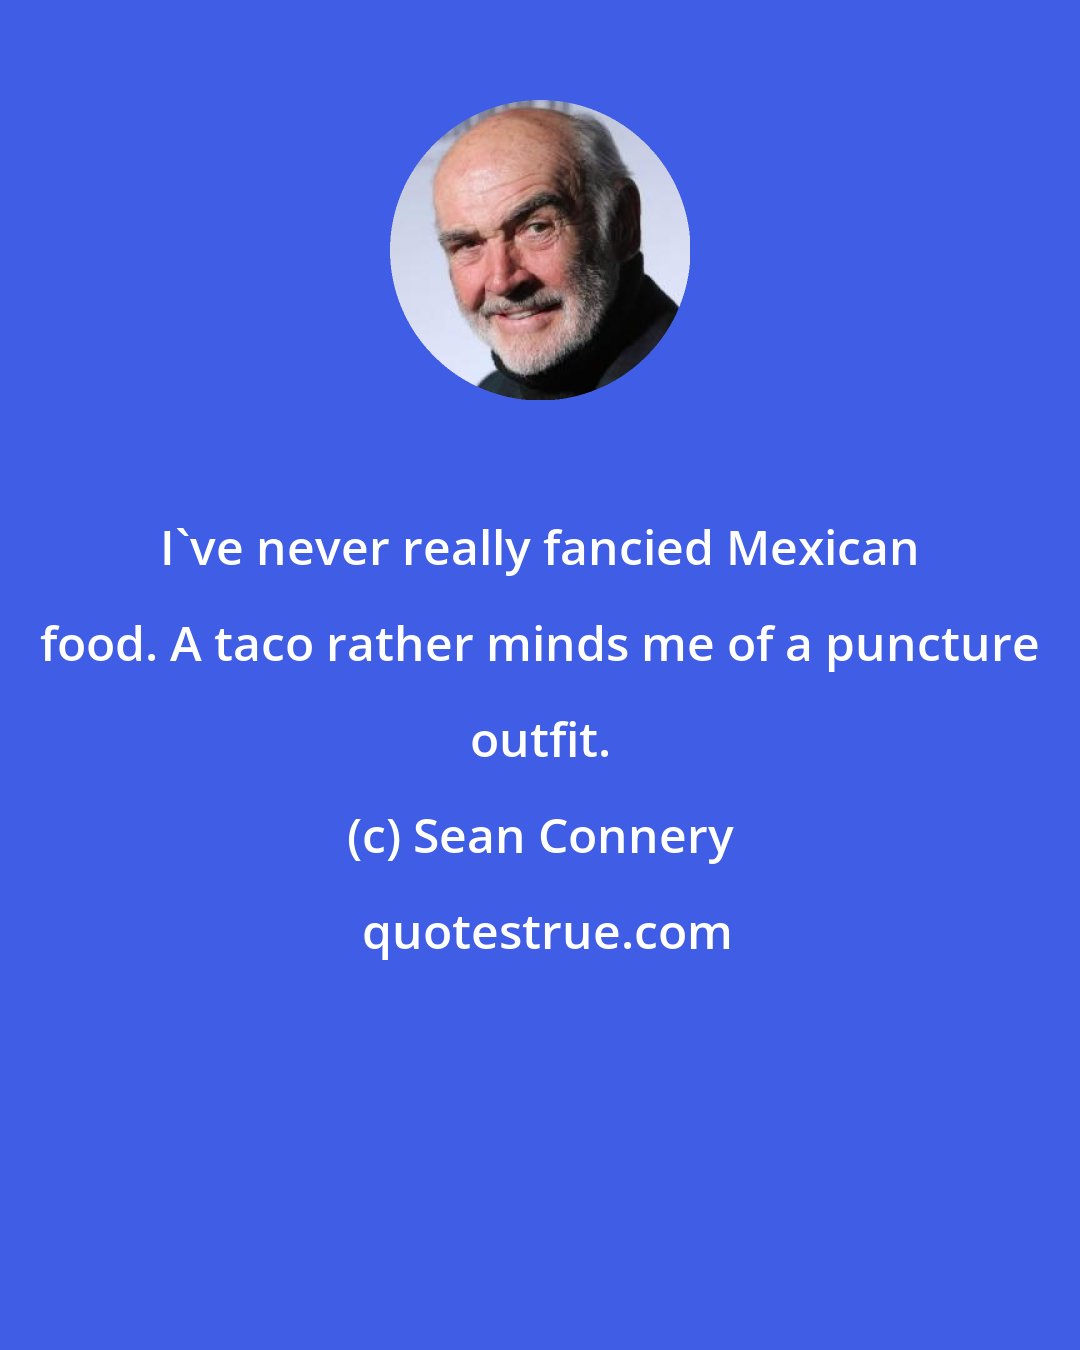 Sean Connery: I've never really fancied Mexican food. A taco rather minds me of a puncture outfit.